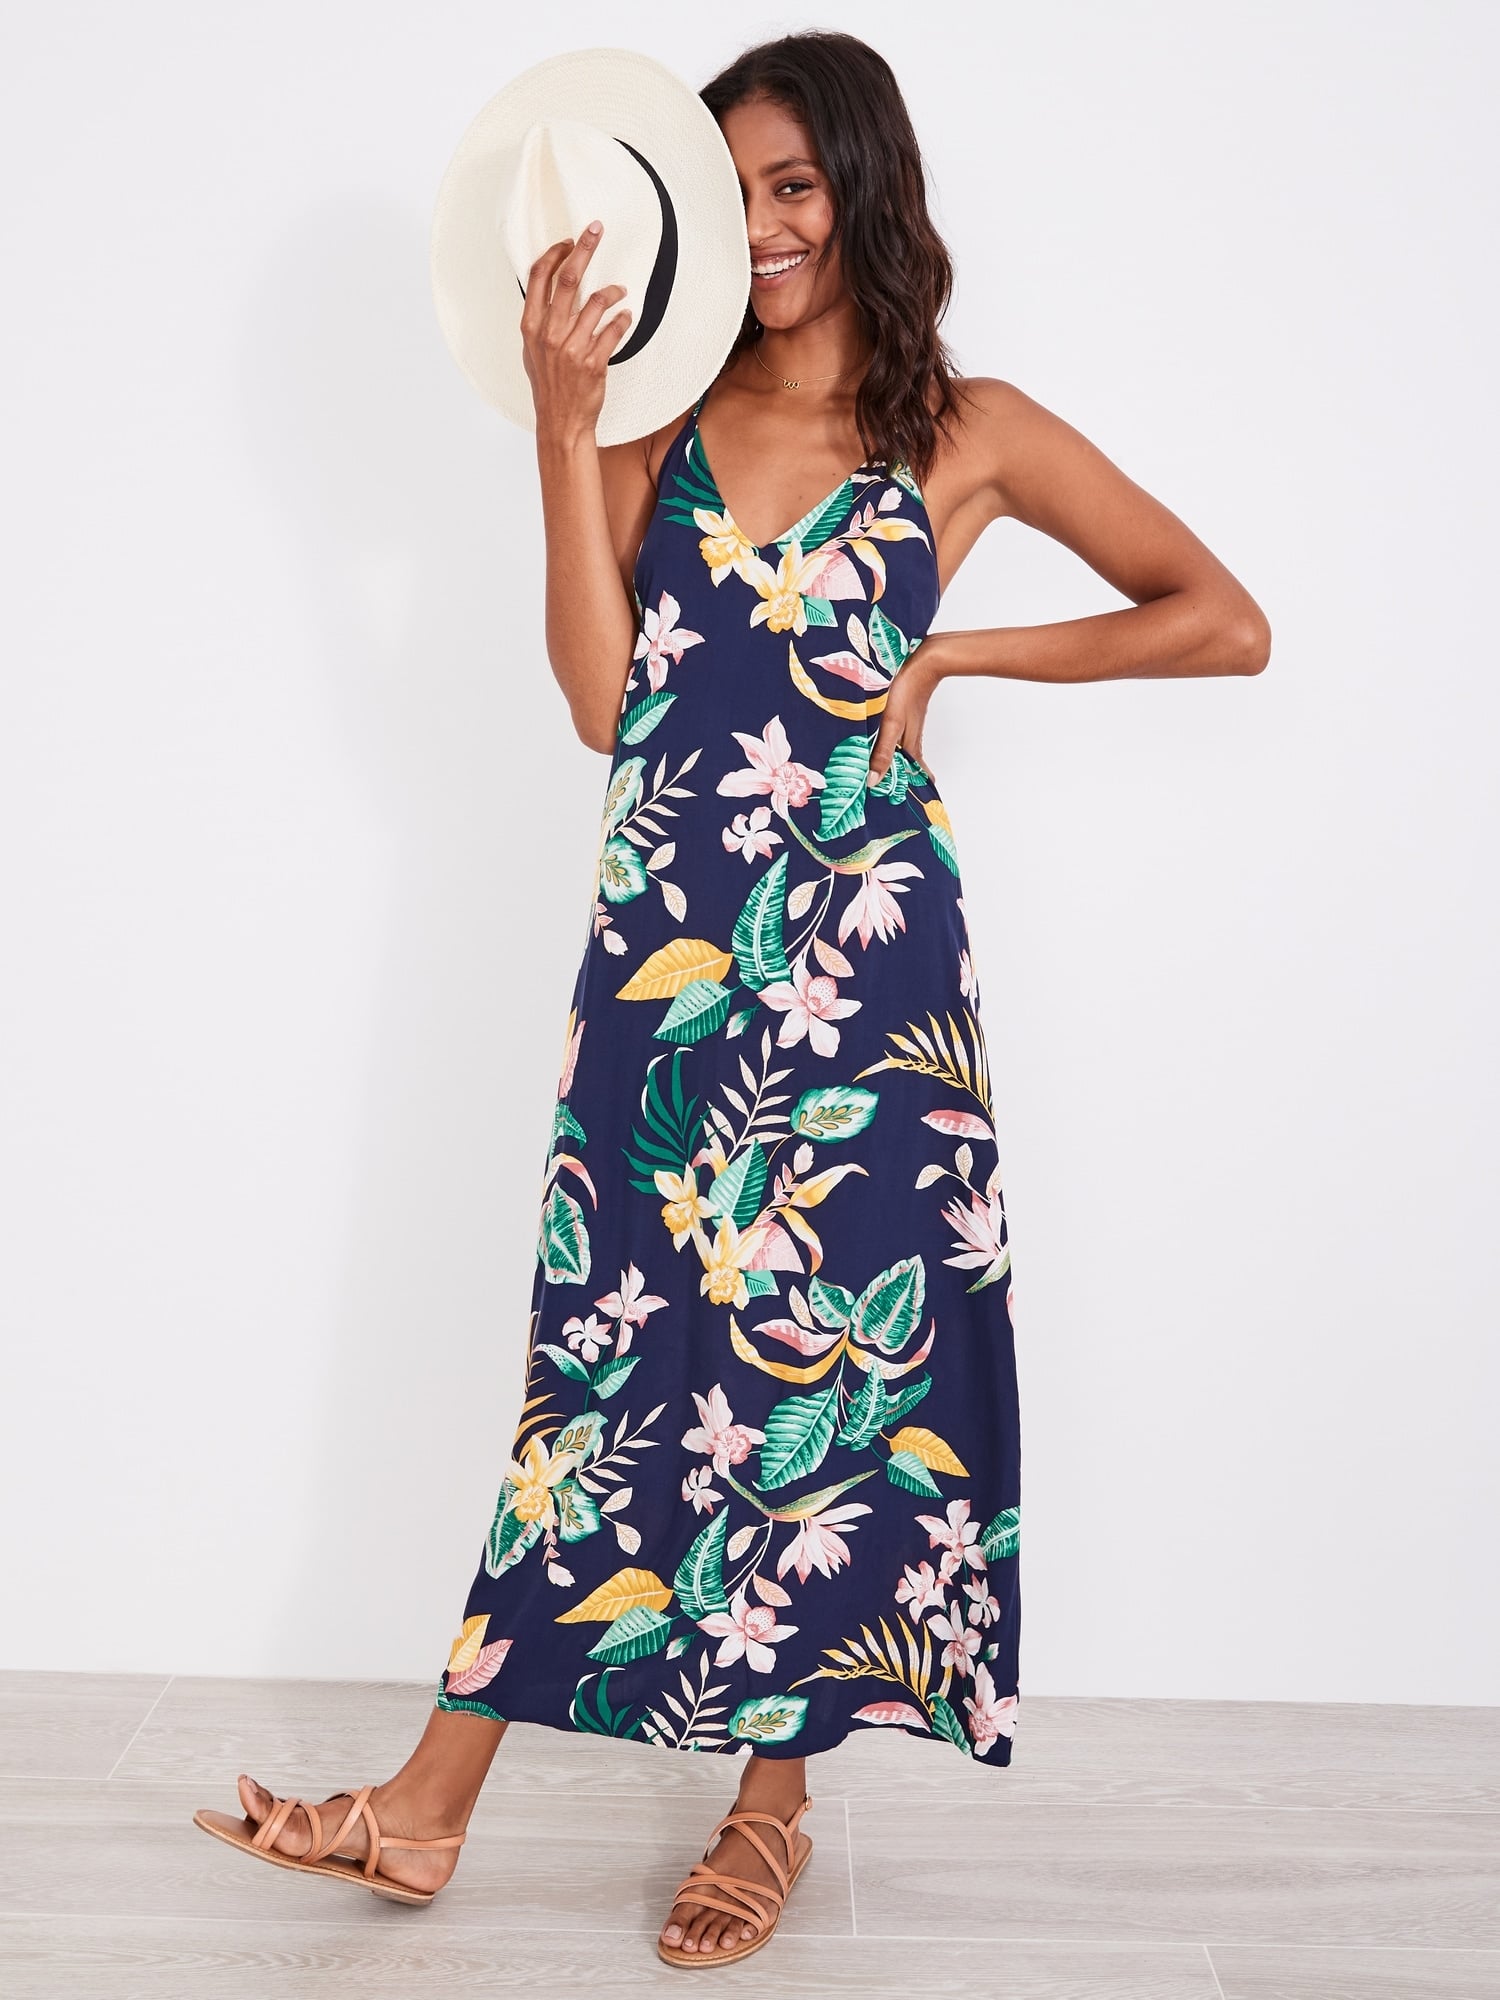 Best Stylish Dresses From Old Navy 